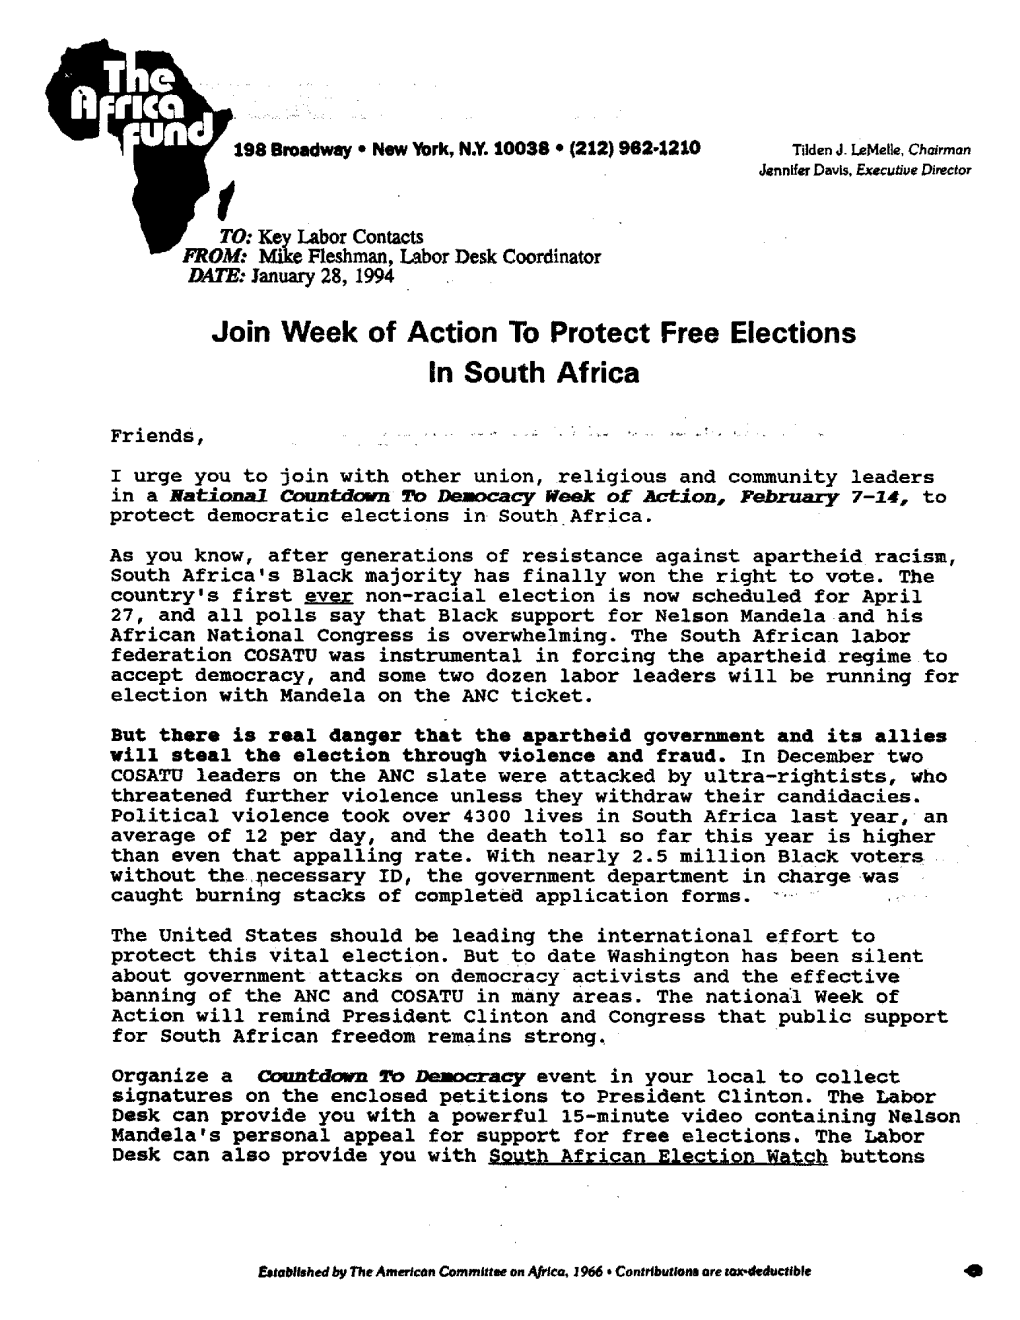 Join Week of Action to Protect Free Elections in South Africa